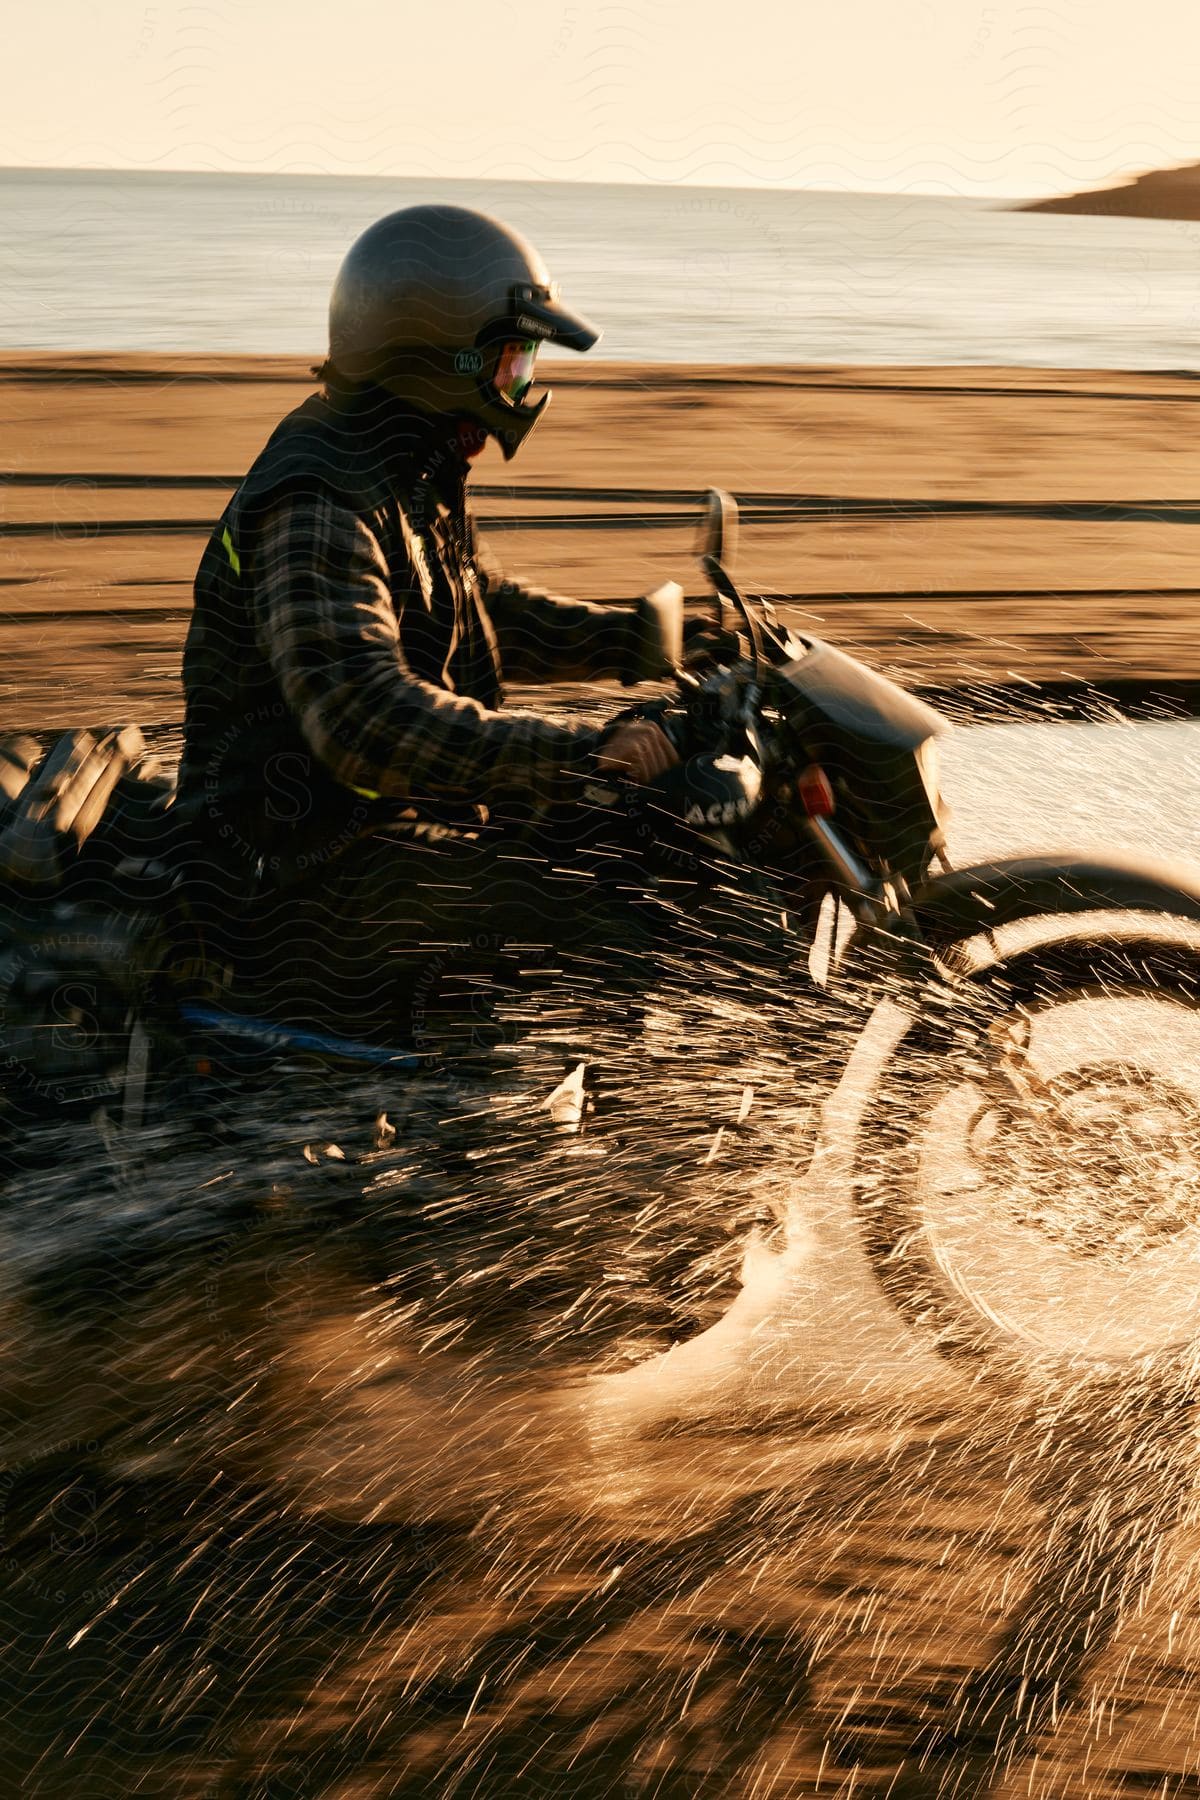 A person riding a motorcycle through water on a sandy beach